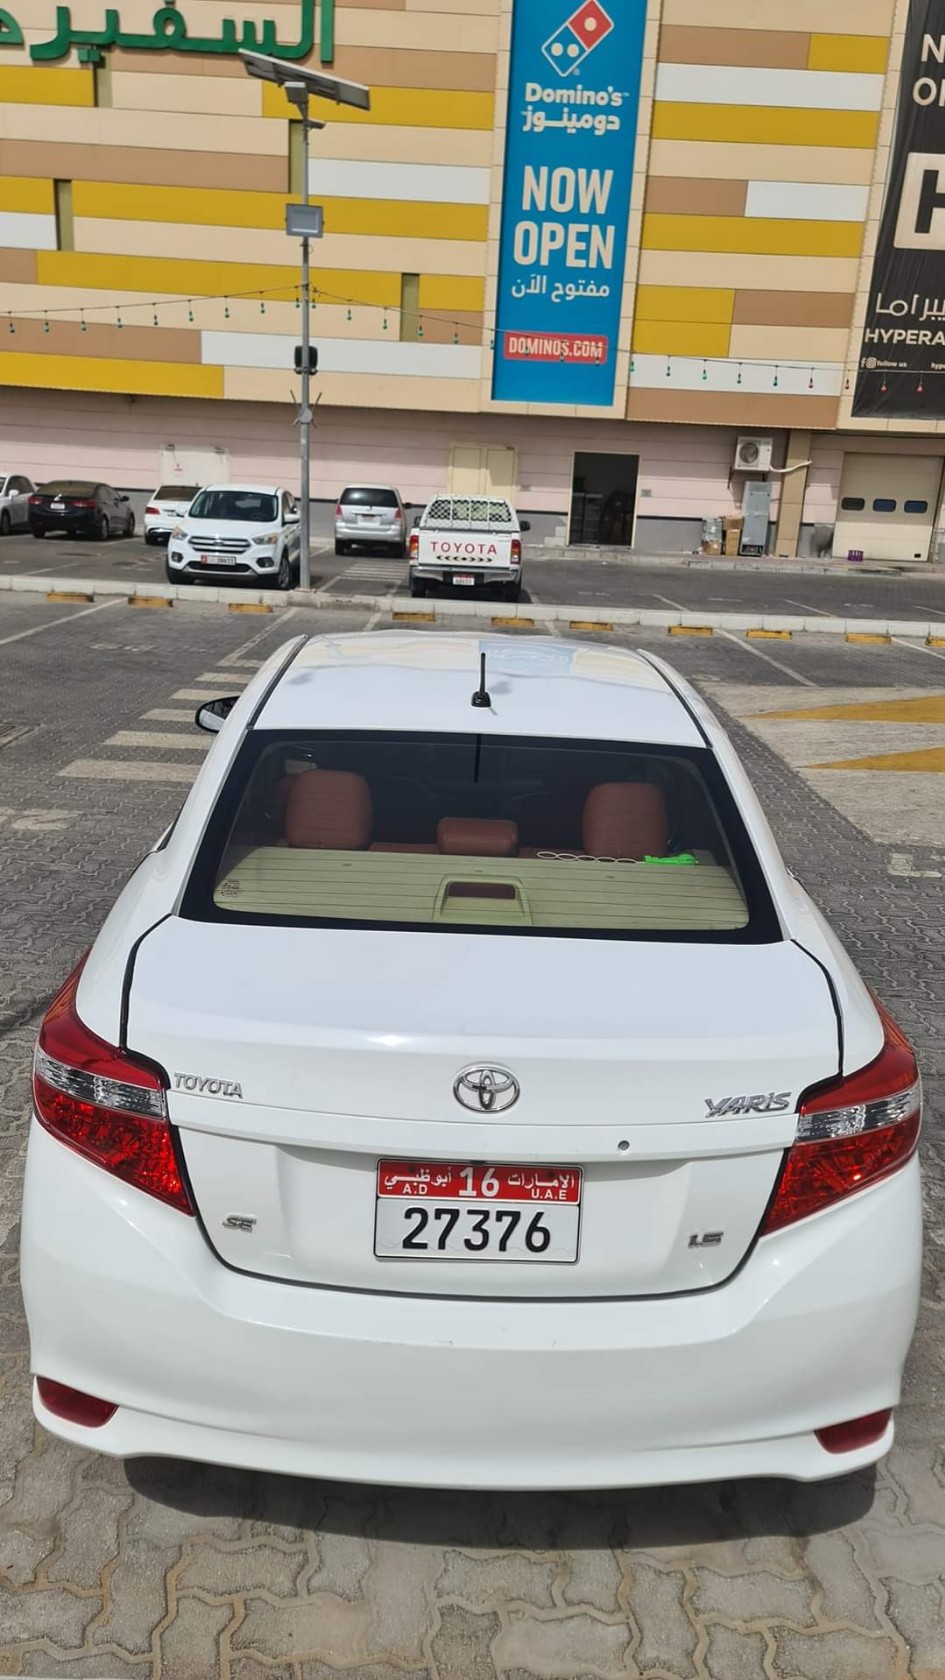 Lightly Used 2015 Toyota Yaris Offered at Just Dhs11,000